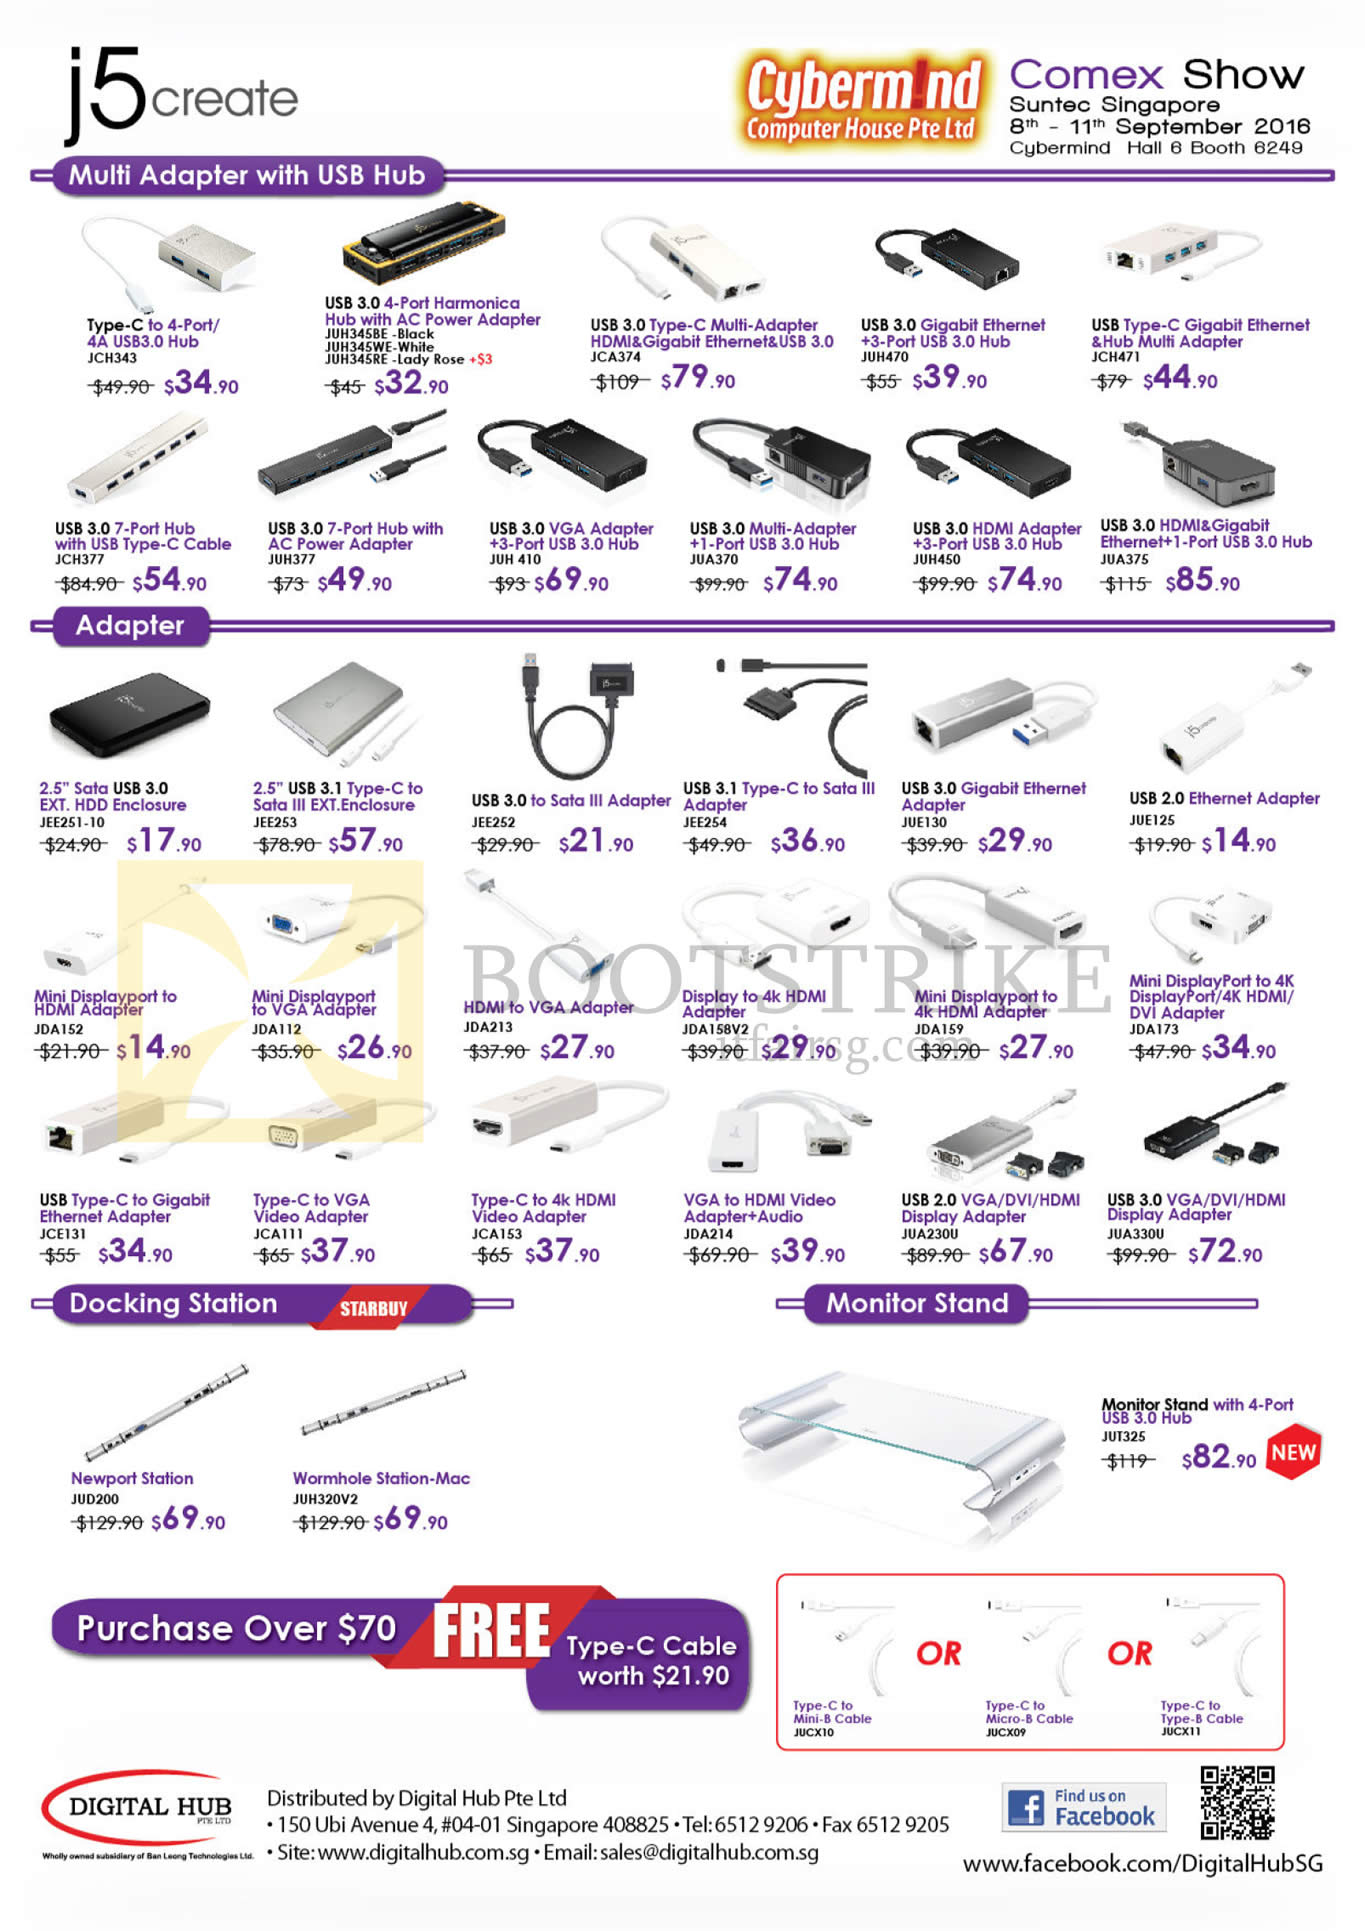 COMEX 2016 price list image brochure of Cybermind J5Create Multimedia Adapter With USB, Adapter, Docking Station, Monitor Stand